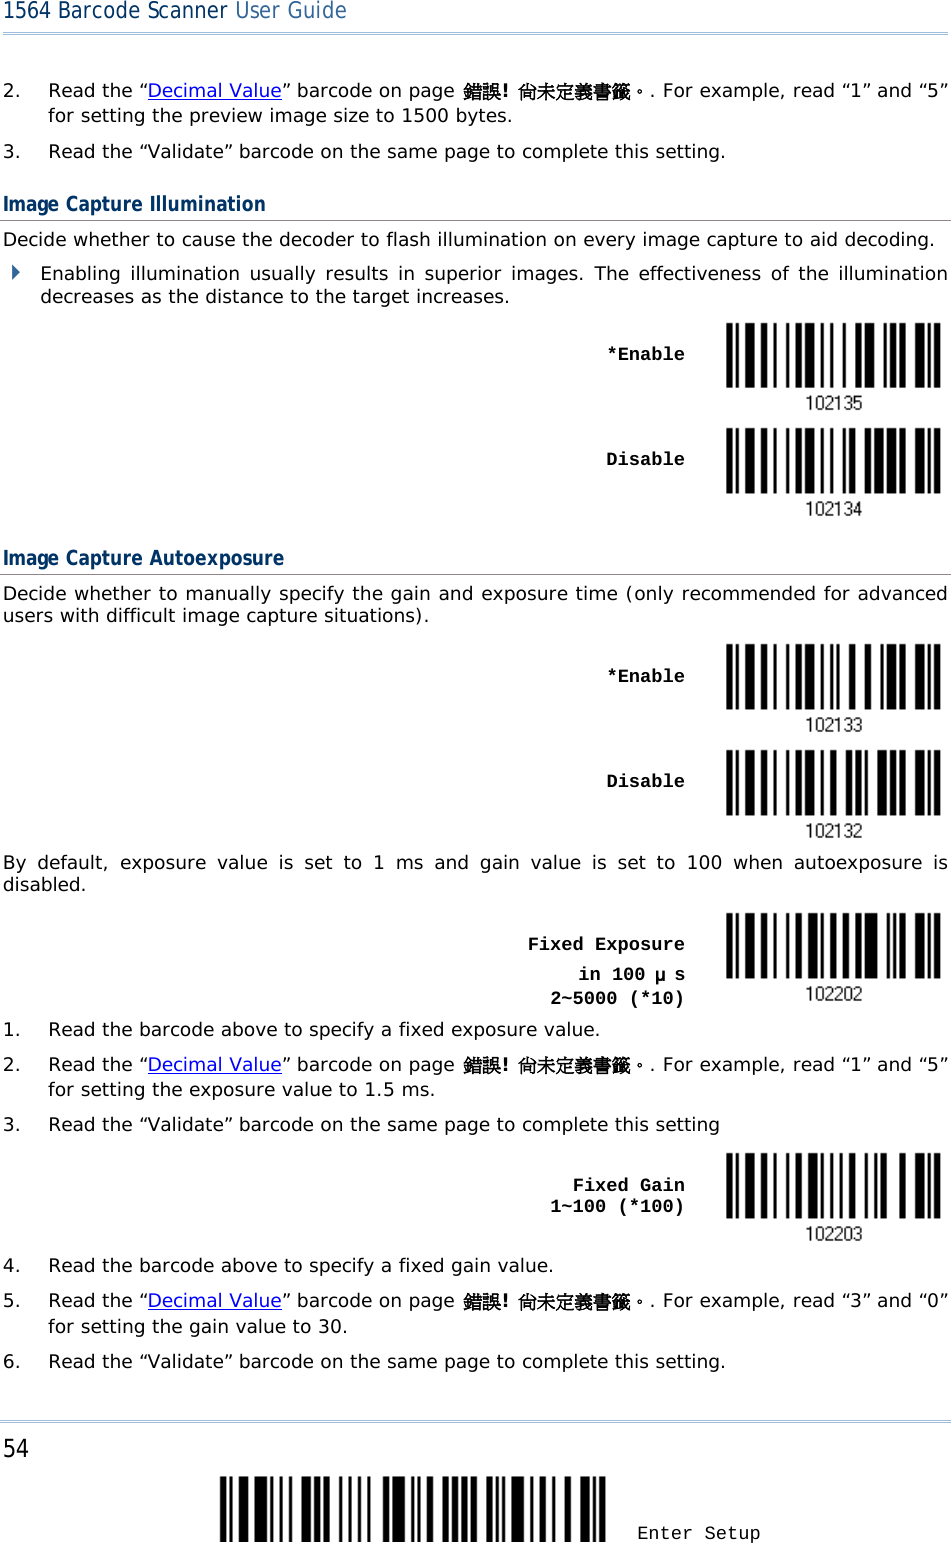 54 Enter Setup 1564 Barcode Scanner User Guide  2. Read the “Decimal Value” barcode on page 錯誤! 尚未定義書籤。. For example, read “1” and “5” for setting the preview image size to 1500 bytes. 3. Read the “Validate” barcode on the same page to complete this setting. Image Capture Illumination Decide whether to cause the decoder to flash illumination on every image capture to aid decoding.   Enabling illumination usually results in superior images. The effectiveness of the illumination decreases as the distance to the target increases.    *Enable       Disable  Image Capture Autoexposure Decide whether to manually specify the gain and exposure time (only recommended for advanced users with difficult image capture situations).    *Enable     Disable  By default, exposure value is set to 1 ms and gain value is set to 100 when autoexposure is disabled.    Fixed Exposure     in 100 μs      2~5000 (*10)  1. Read the barcode above to specify a fixed exposure value. 2. Read the “Decimal Value” barcode on page 錯誤! 尚未定義書籤。. For example, read “1” and “5” for setting the exposure value to 1.5 ms. 3. Read the “Validate” barcode on the same page to complete this setting      Fixed Gain                1~100 (*100)  4. Read the barcode above to specify a fixed gain value. 5. Read the “Decimal Value” barcode on page 錯誤! 尚未定義書籤。. For example, read “3” and “0” for setting the gain value to 30. 6. Read the “Validate” barcode on the same page to complete this setting. 